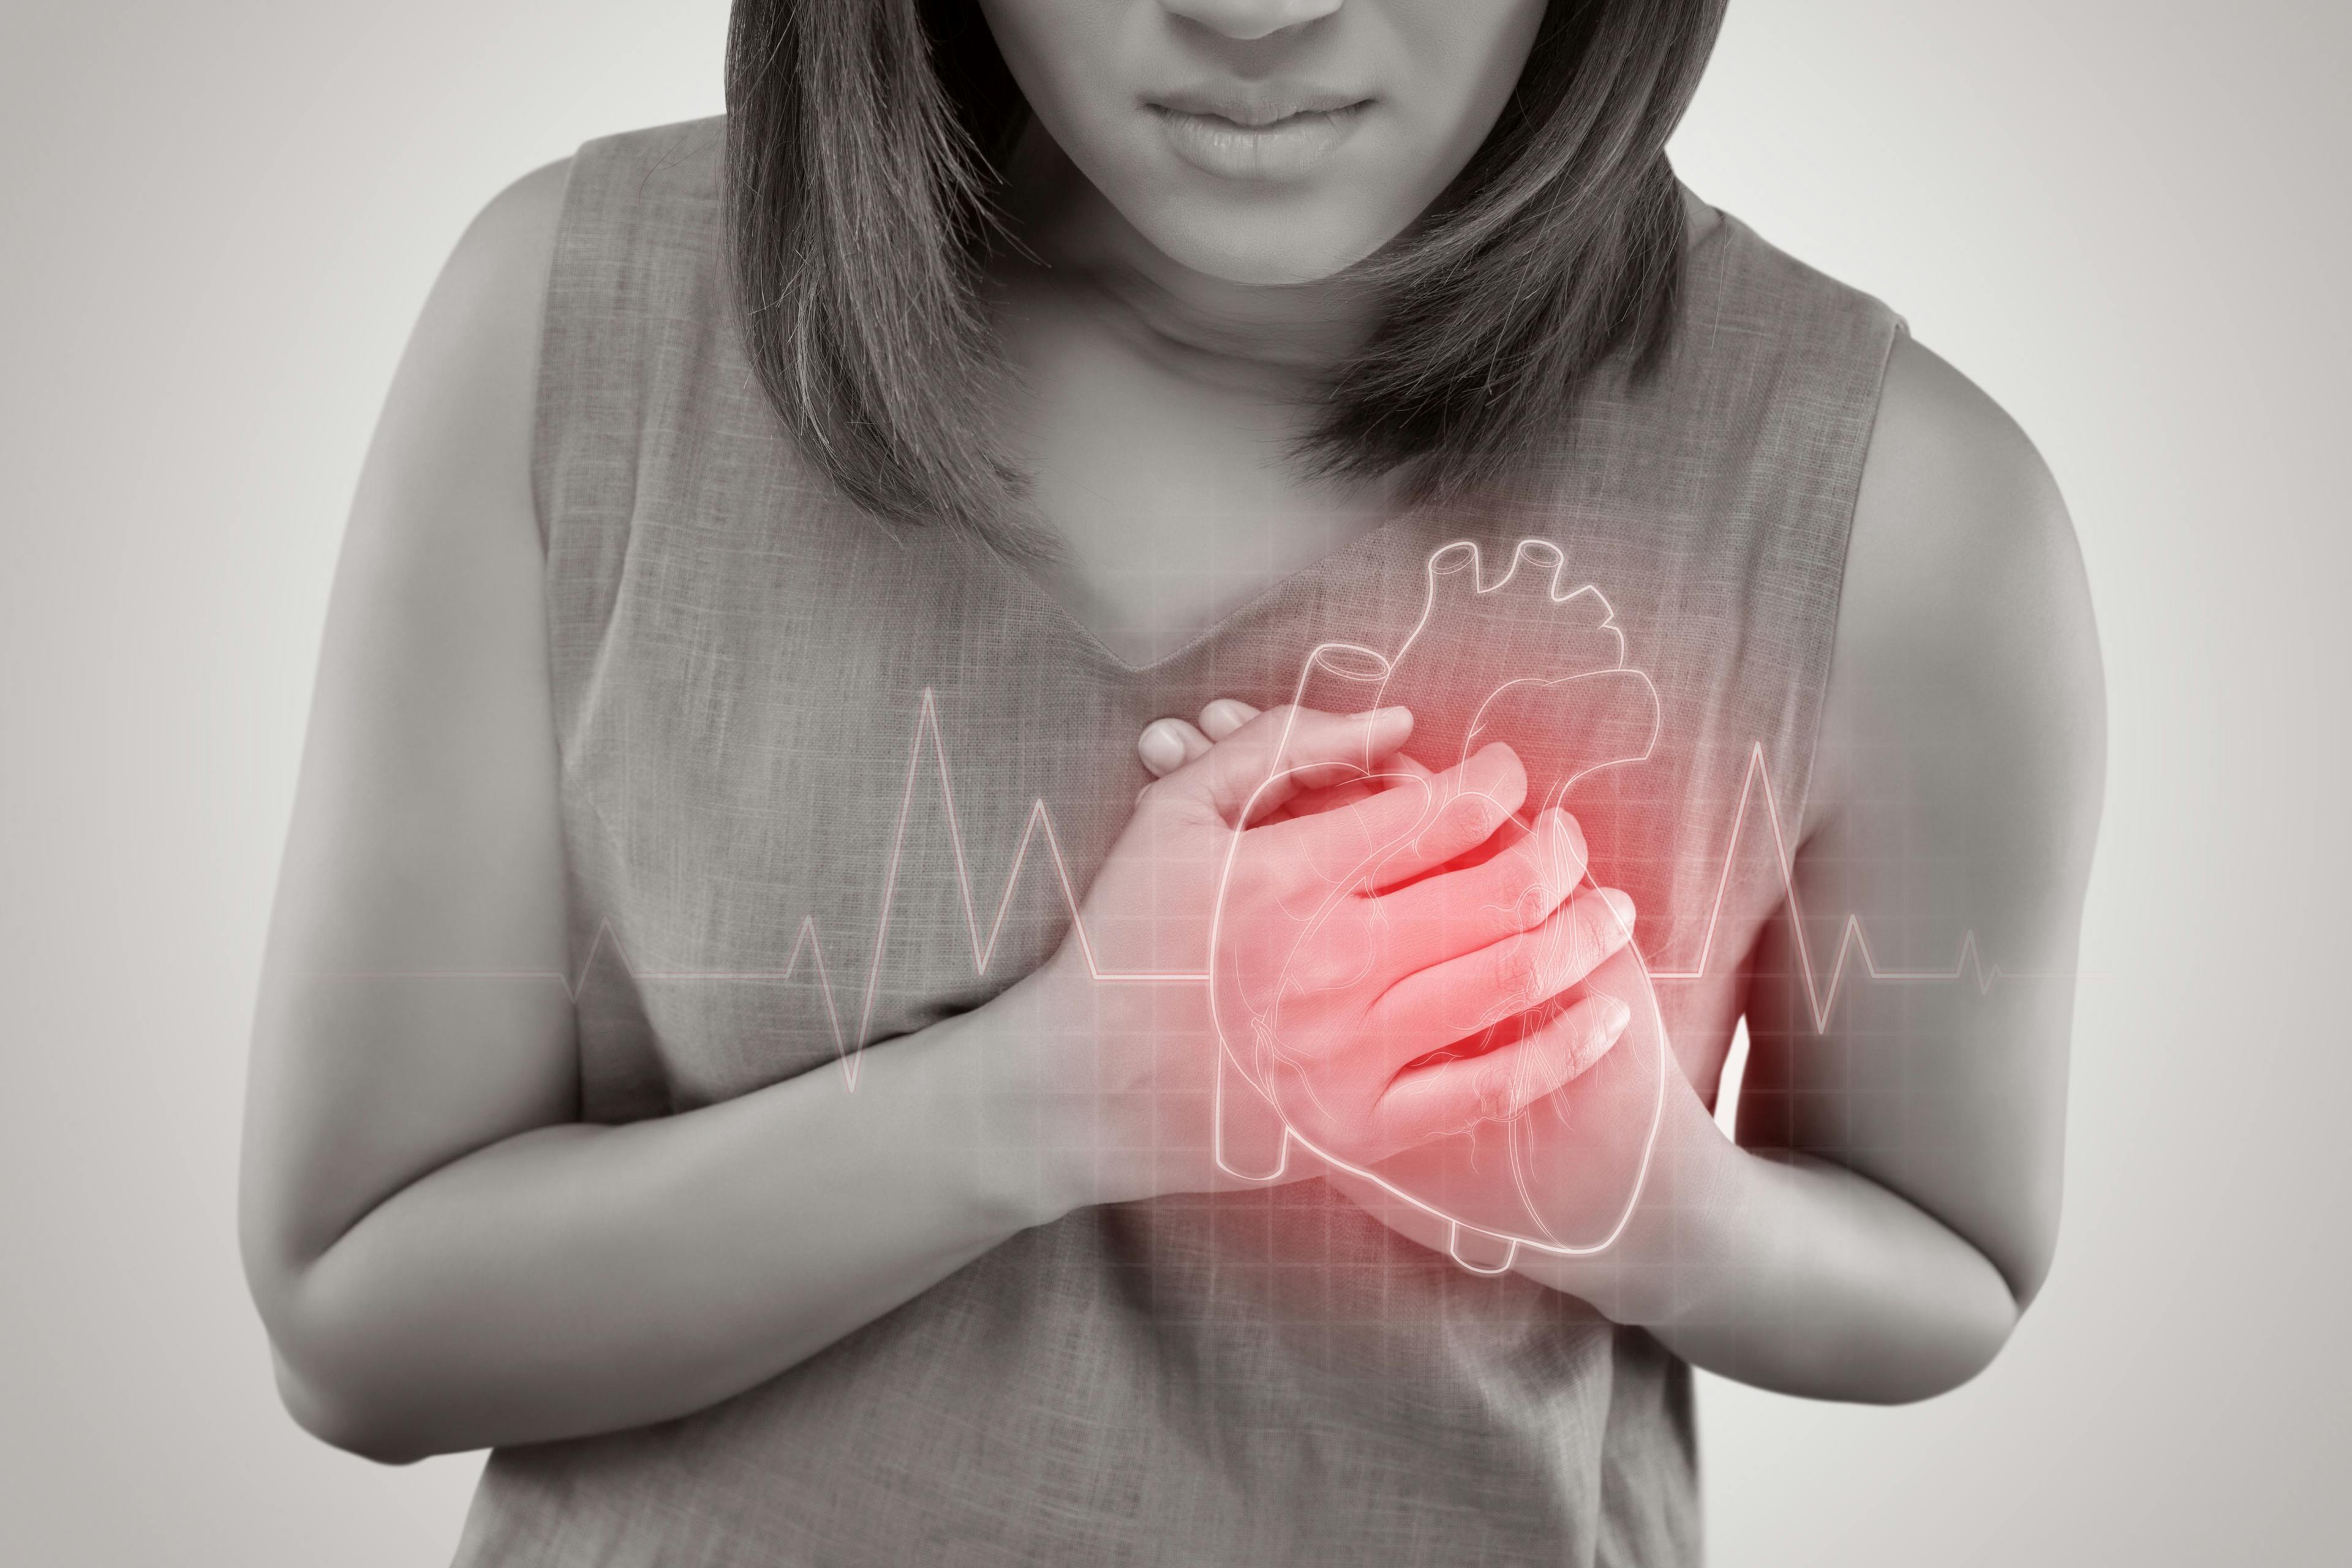 The women has heart disease and go to hospital urgent. People with heart problem concept | Image Credit: eddows - stock.adobe.com